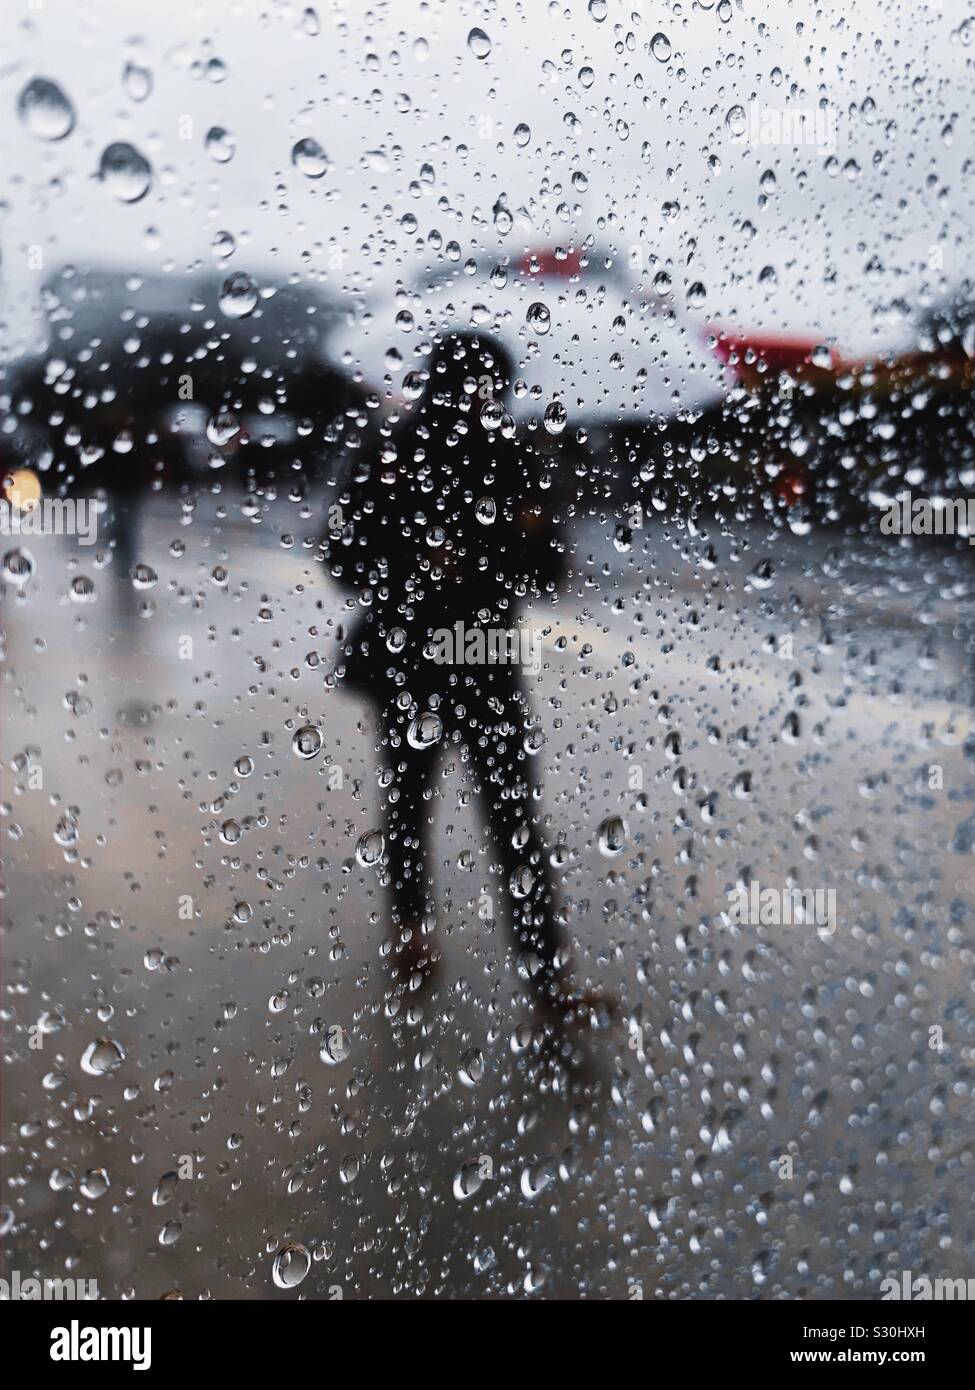 Person with an umbrella during a rainy day. Stock Photo